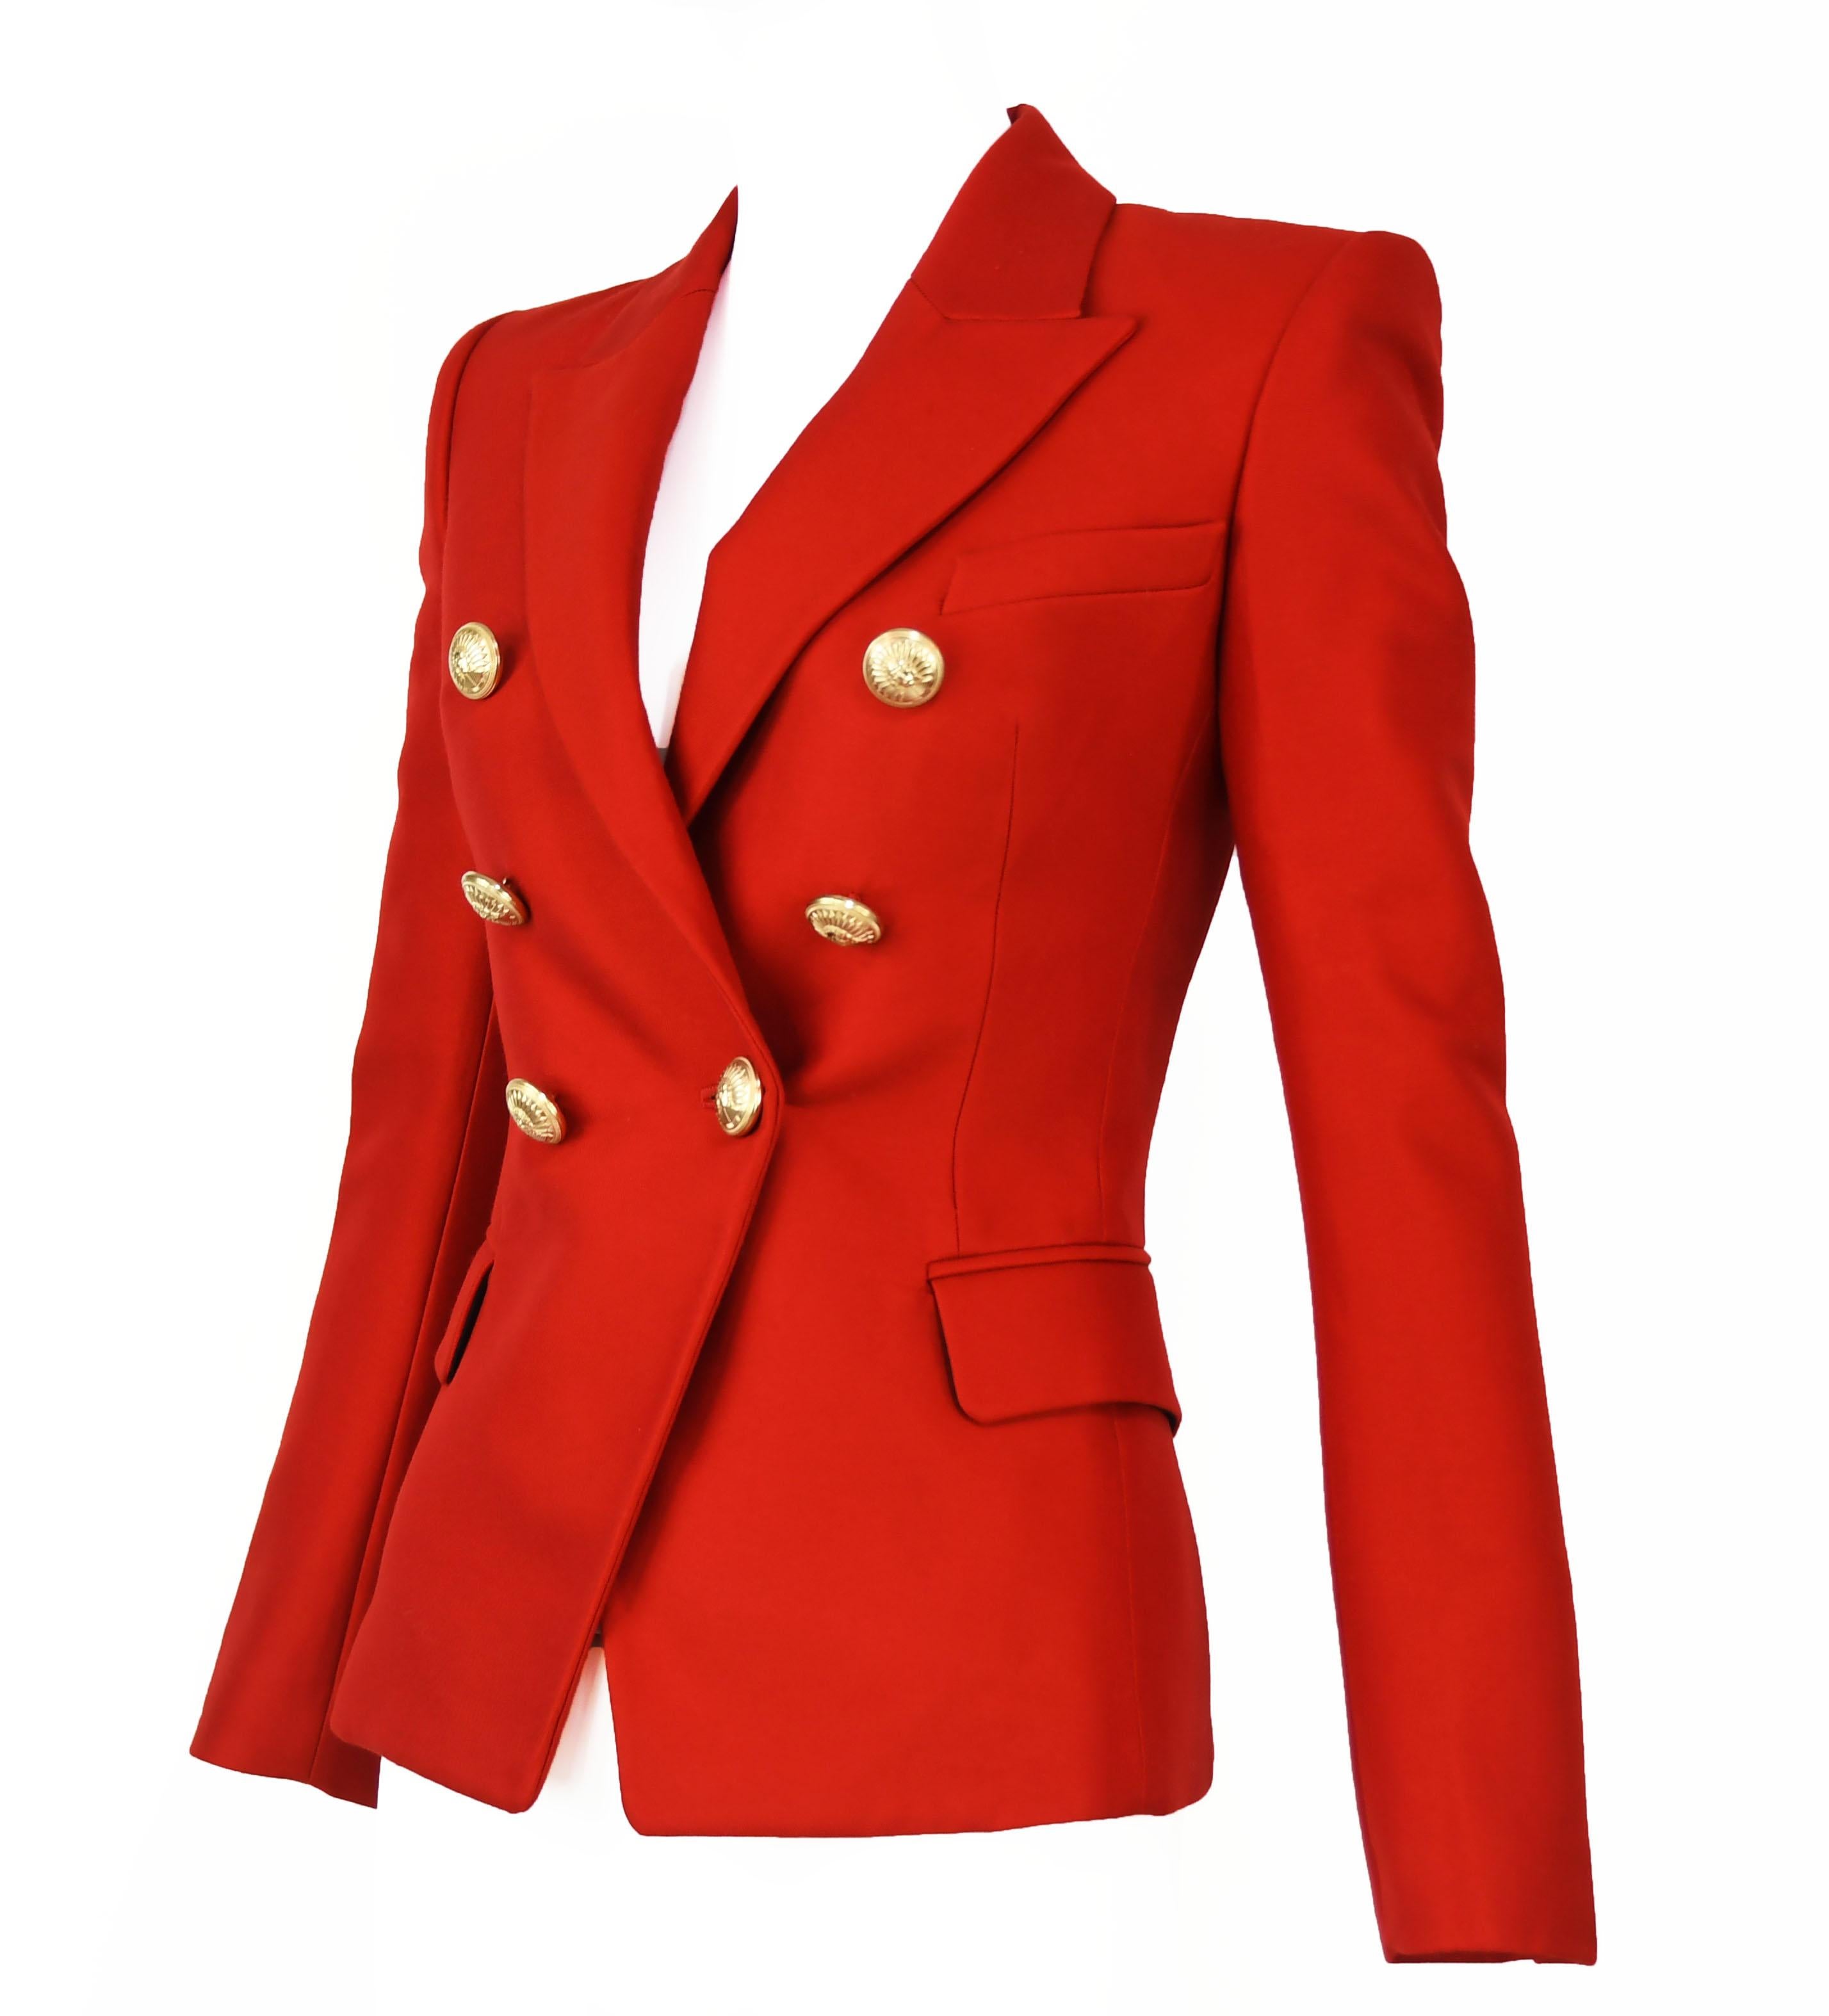 Balmain red double breasted blazer with gold Indian buttons.  Shell is 74% viscose and 26% silk.  Brand new with original tags.